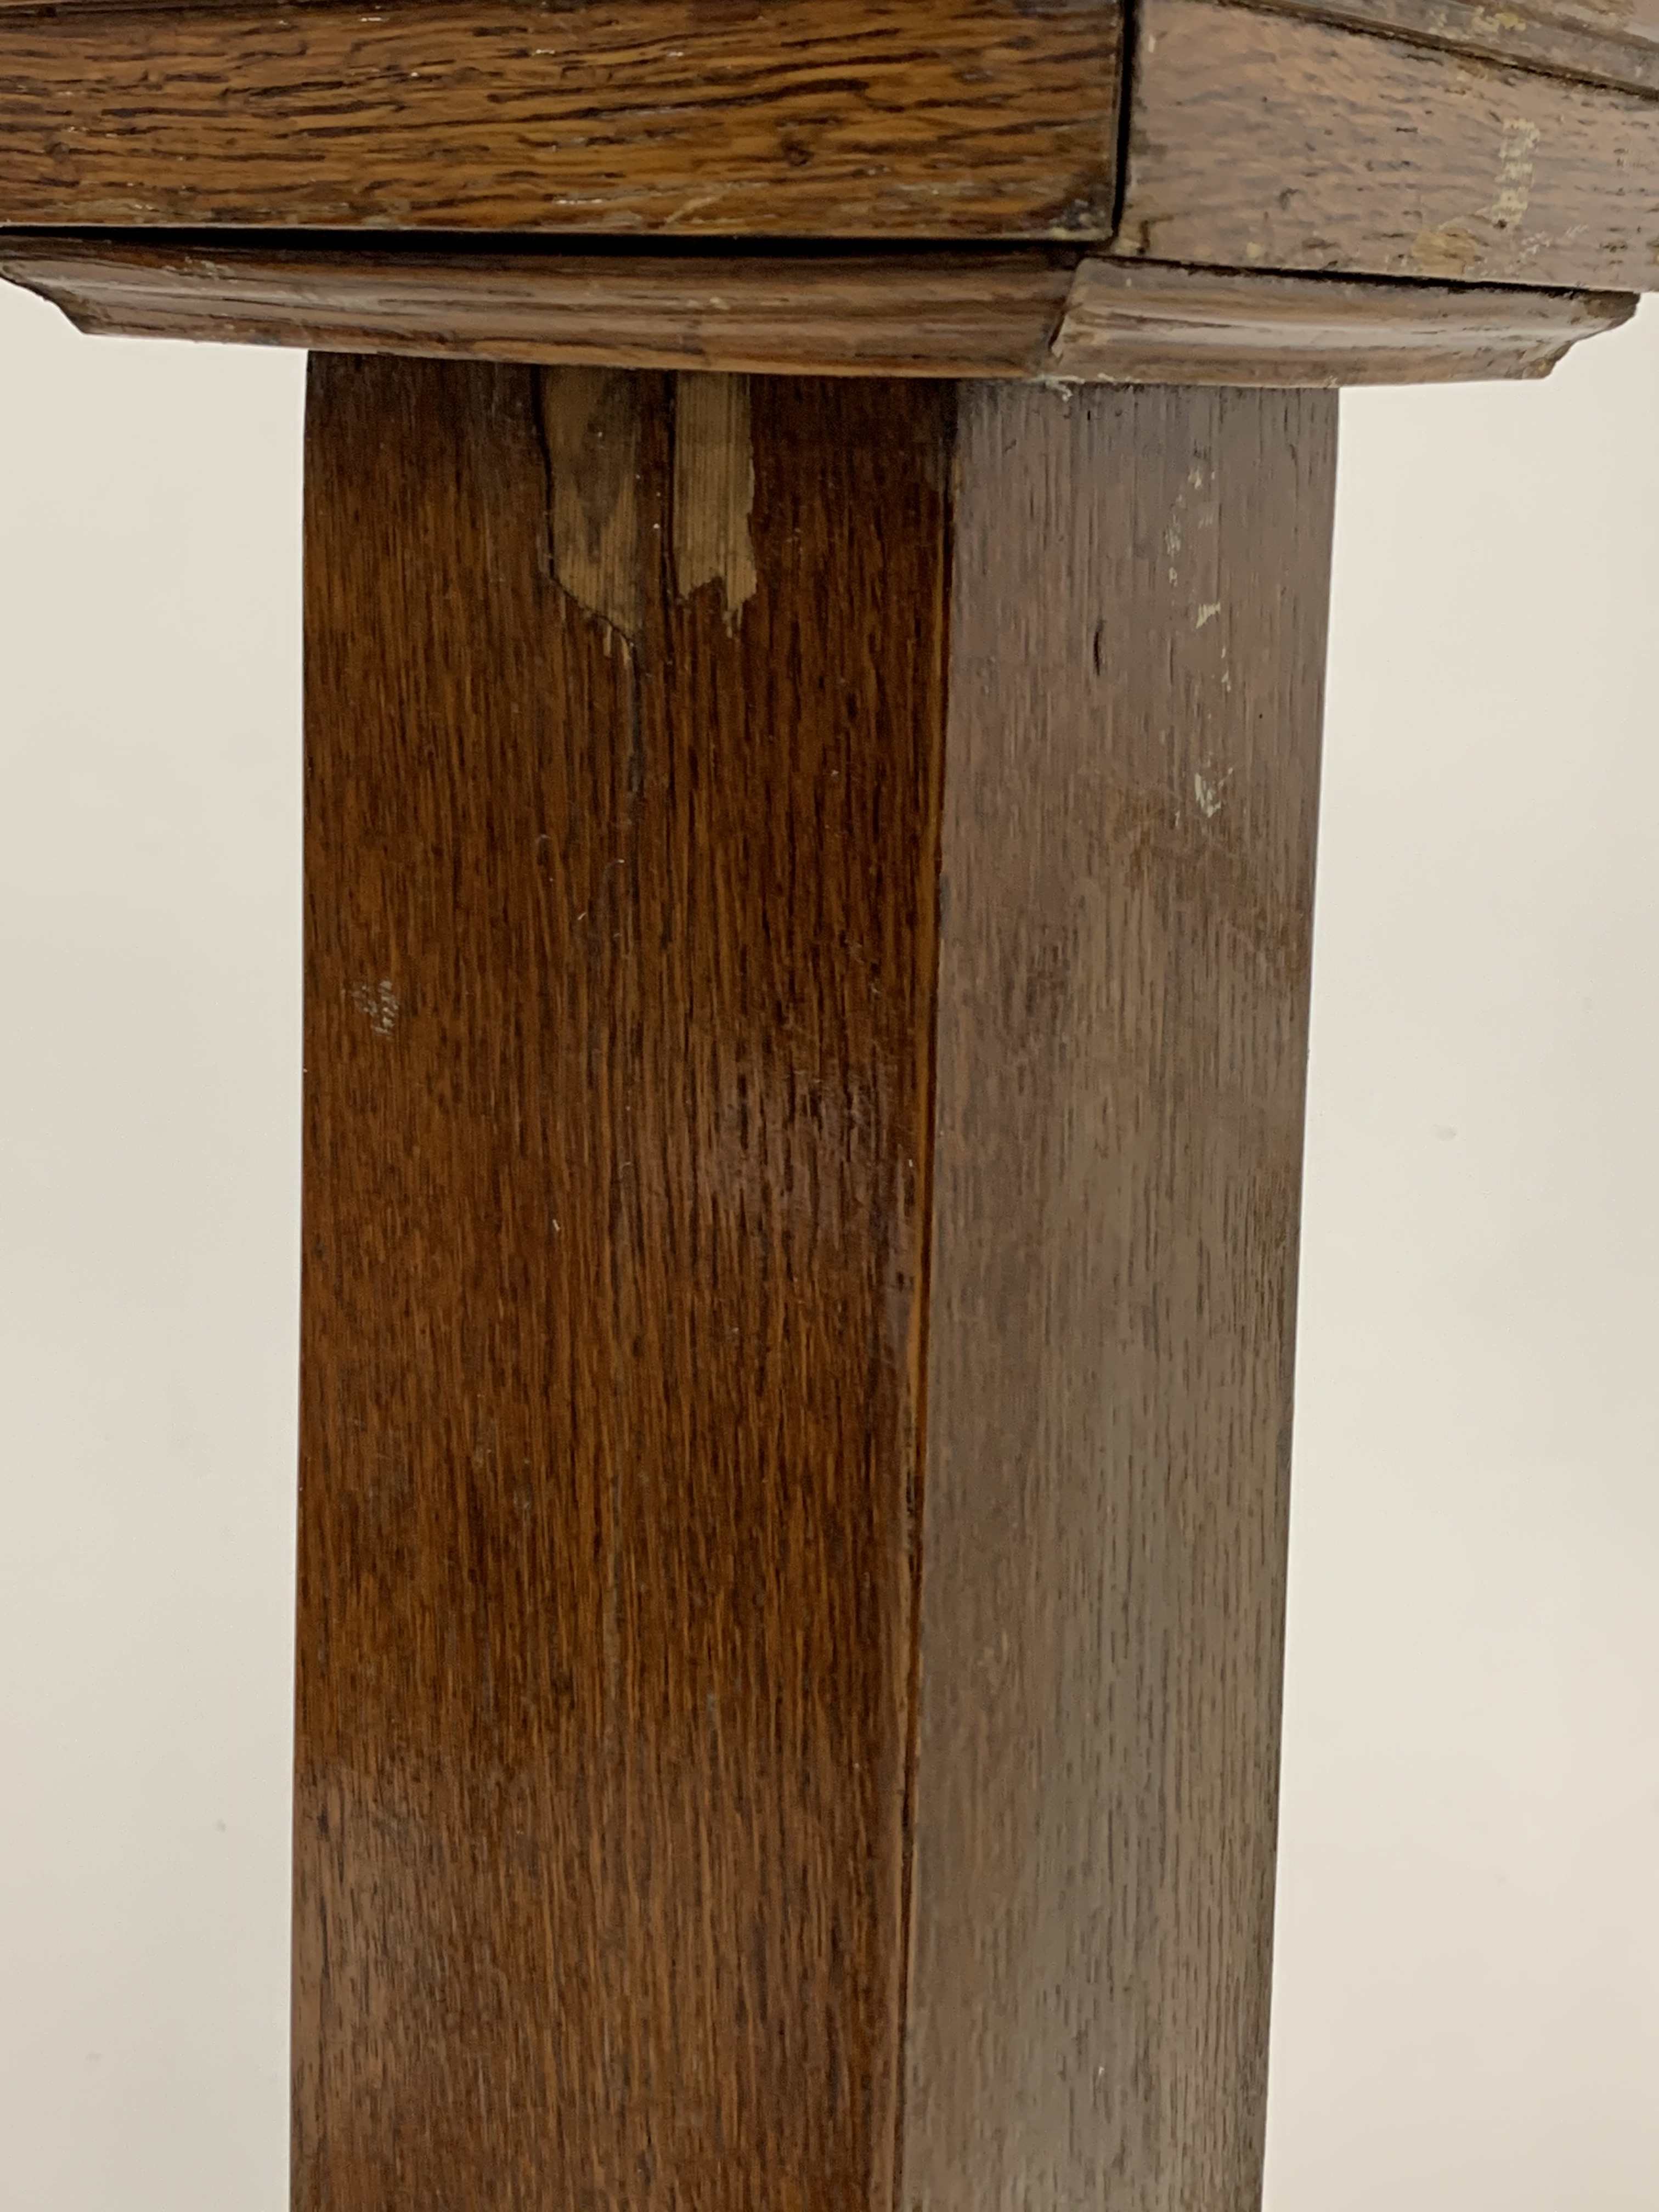 Early 20th century ecclesiastical oak pedestal jardini�re stand, with square moulded top over square - Image 4 of 4